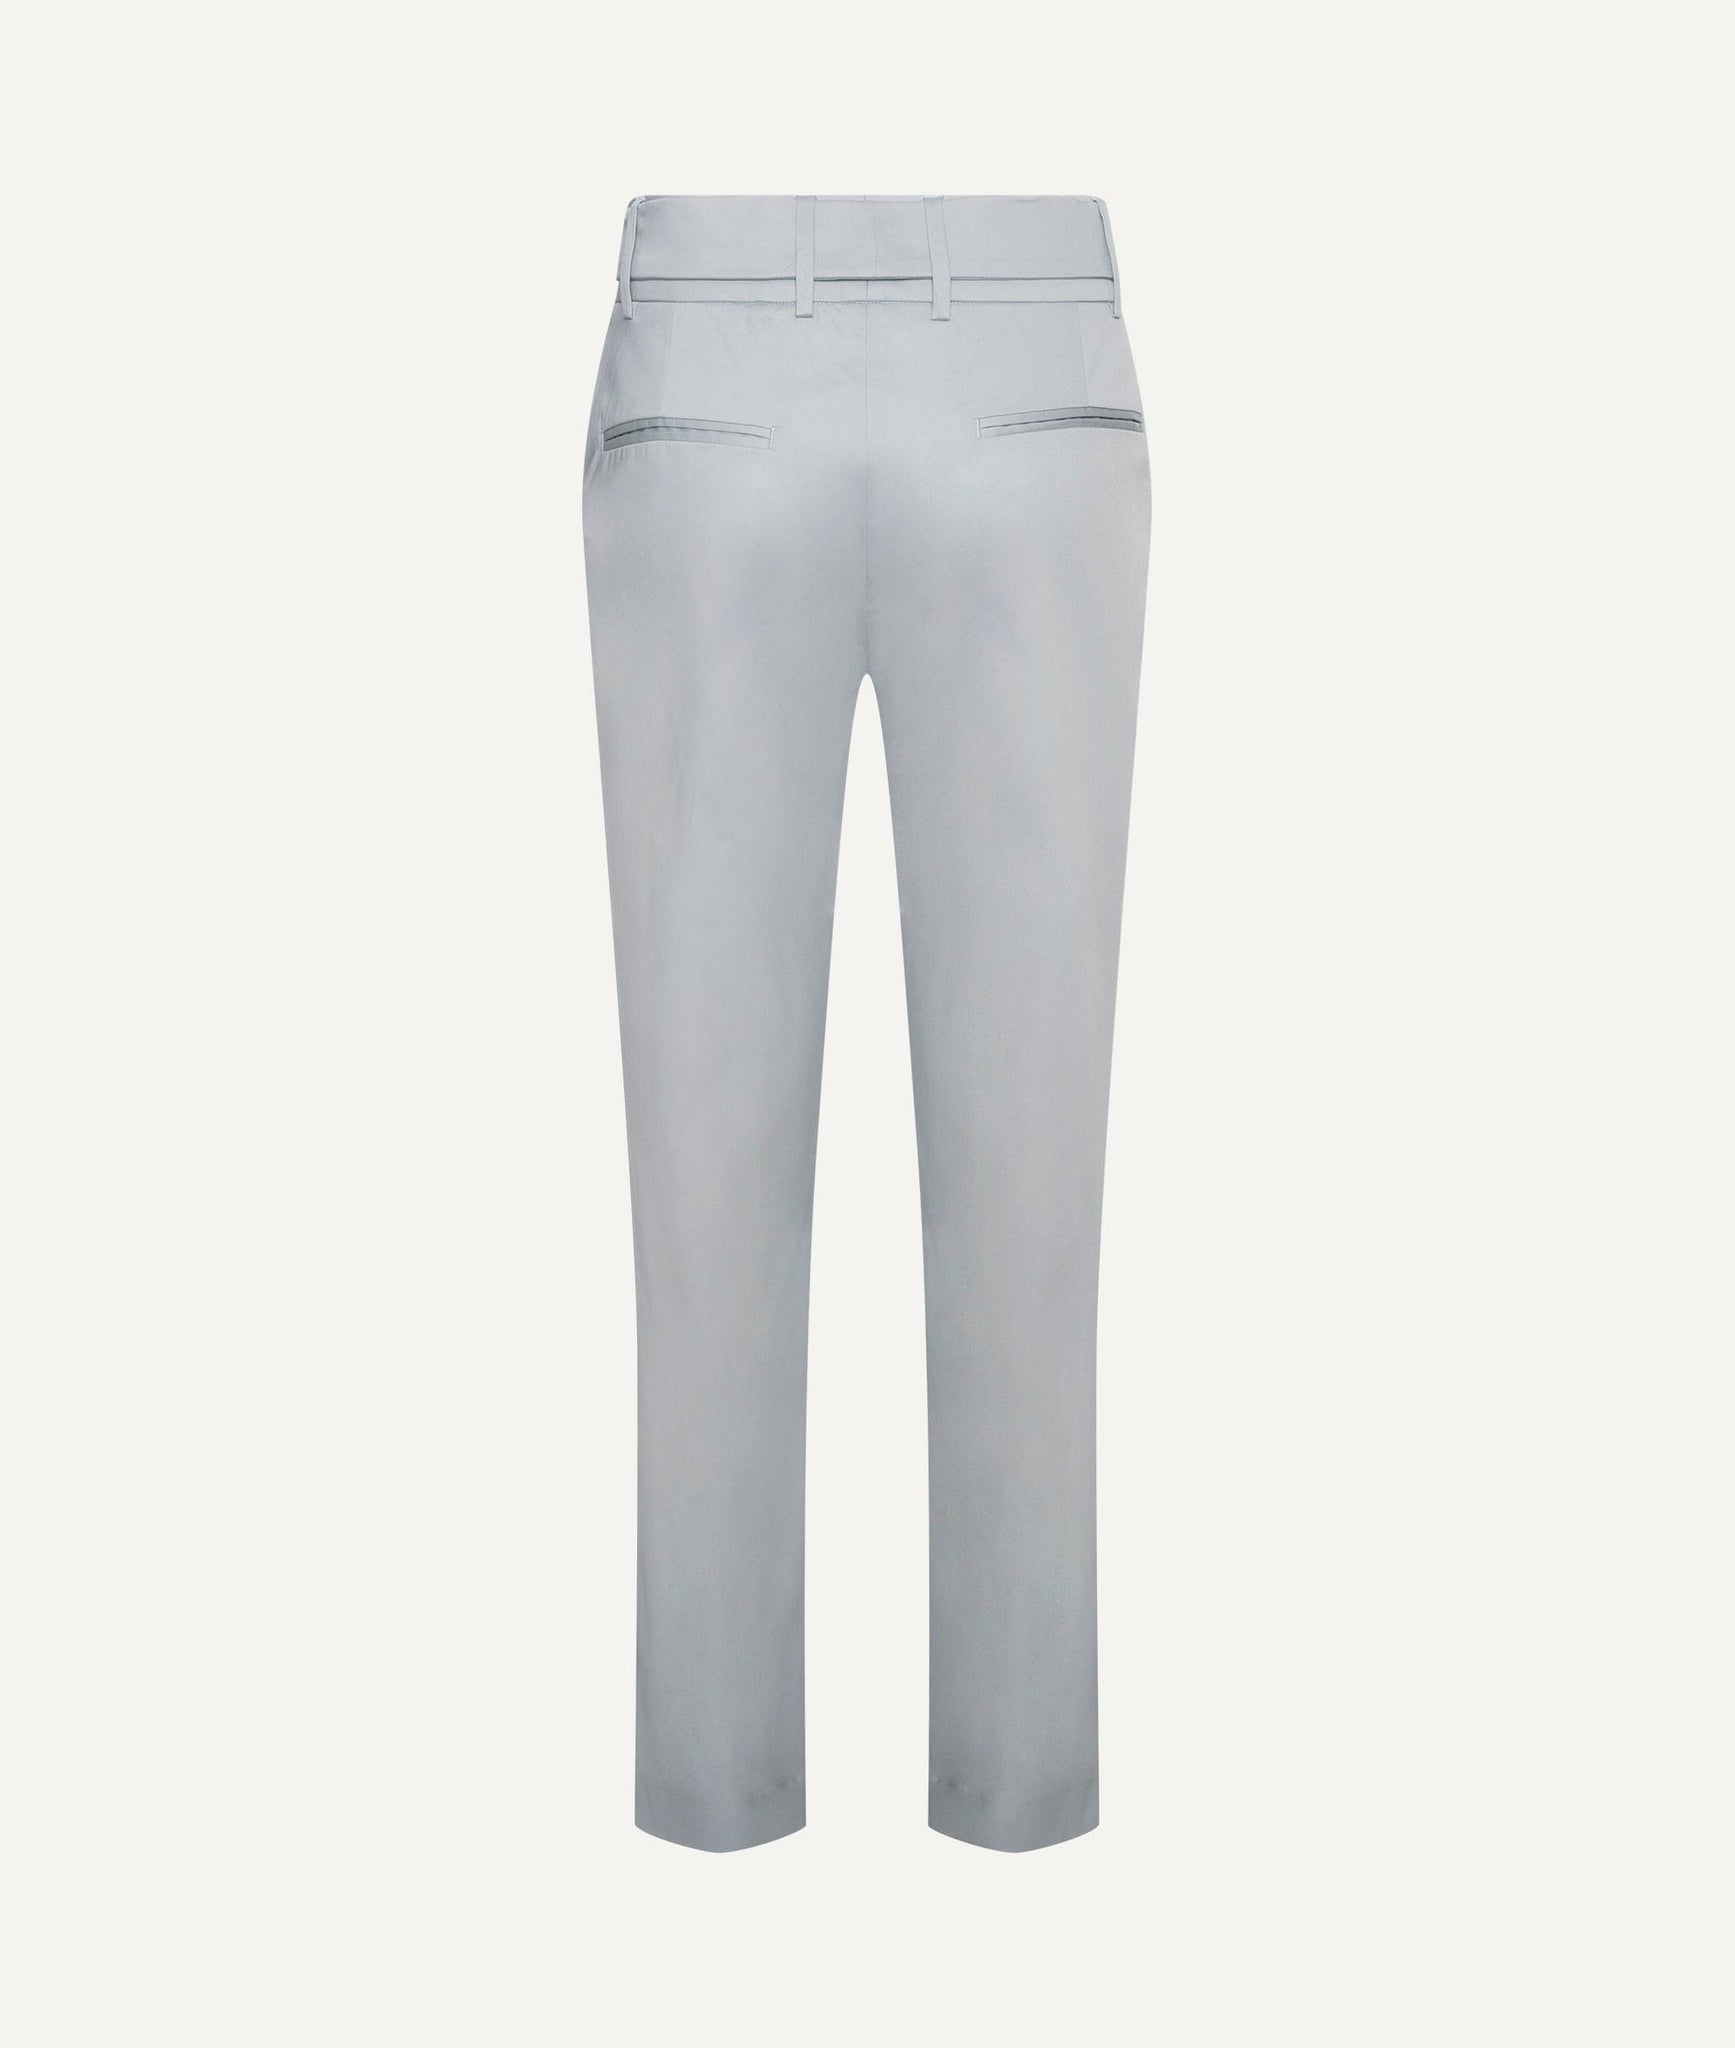 Eleventy - Pants in Cotton